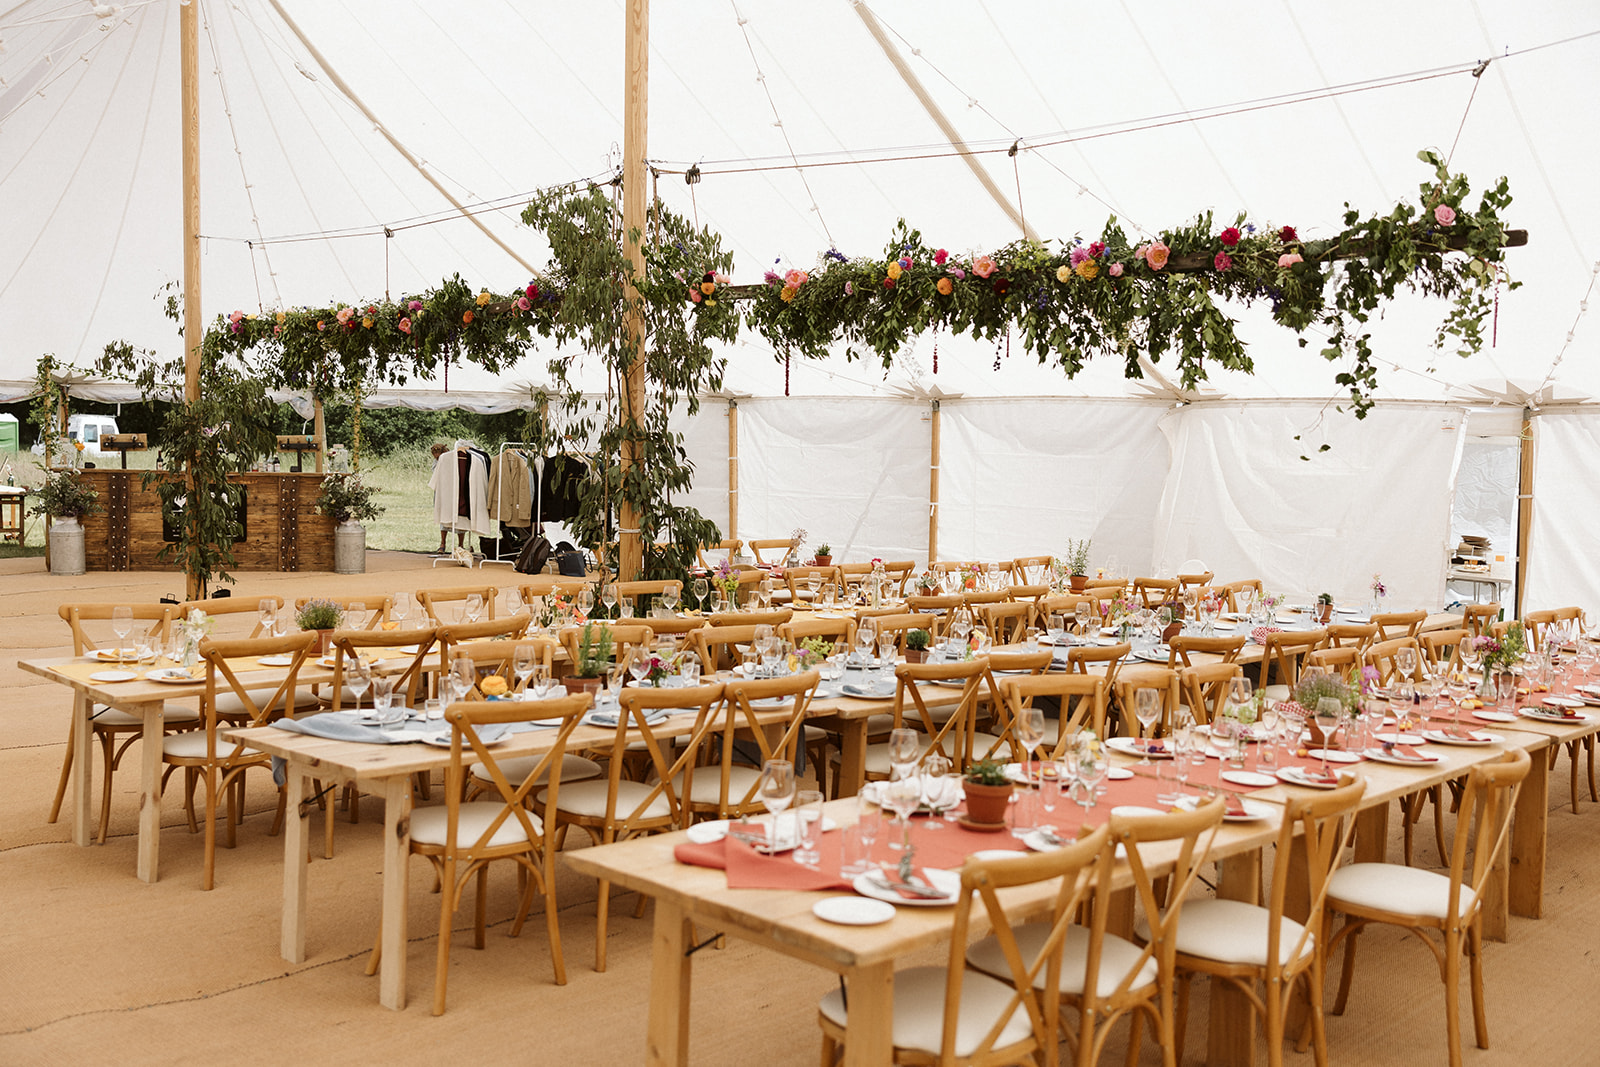 Styling inside a sailcoth marquee